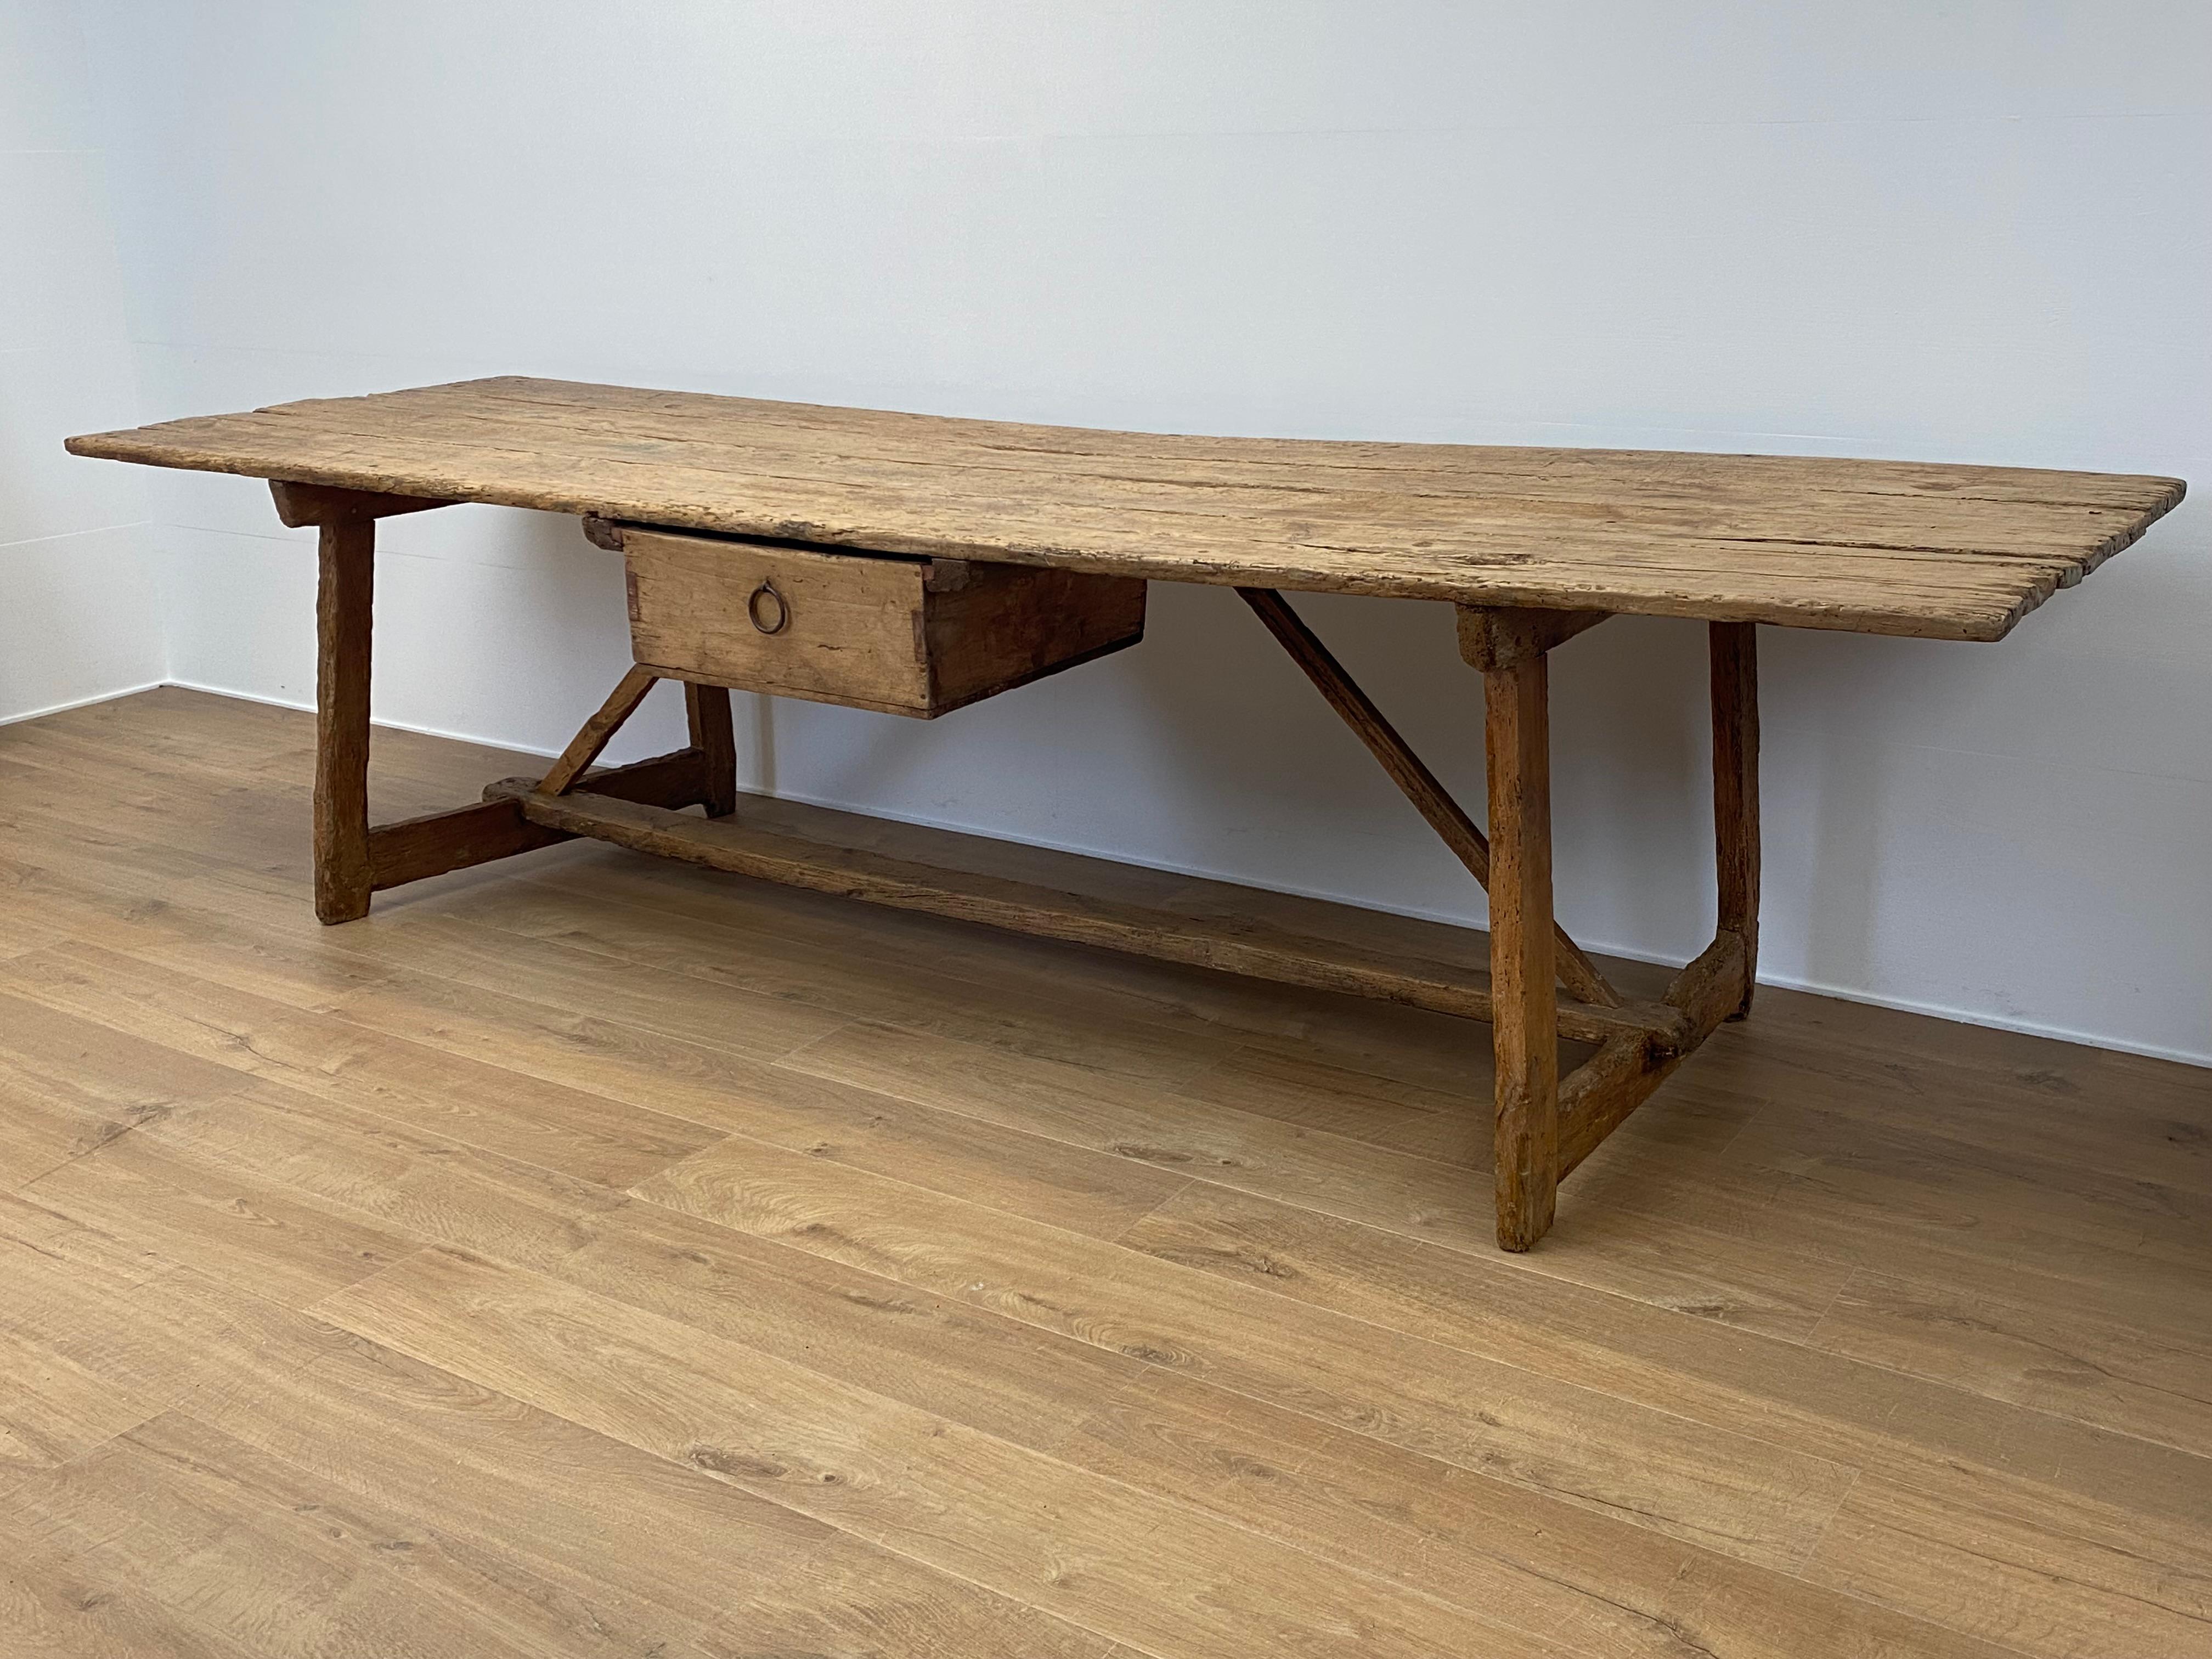 Bleached Brutalist, Rustic Spanish Farm Table For Sale